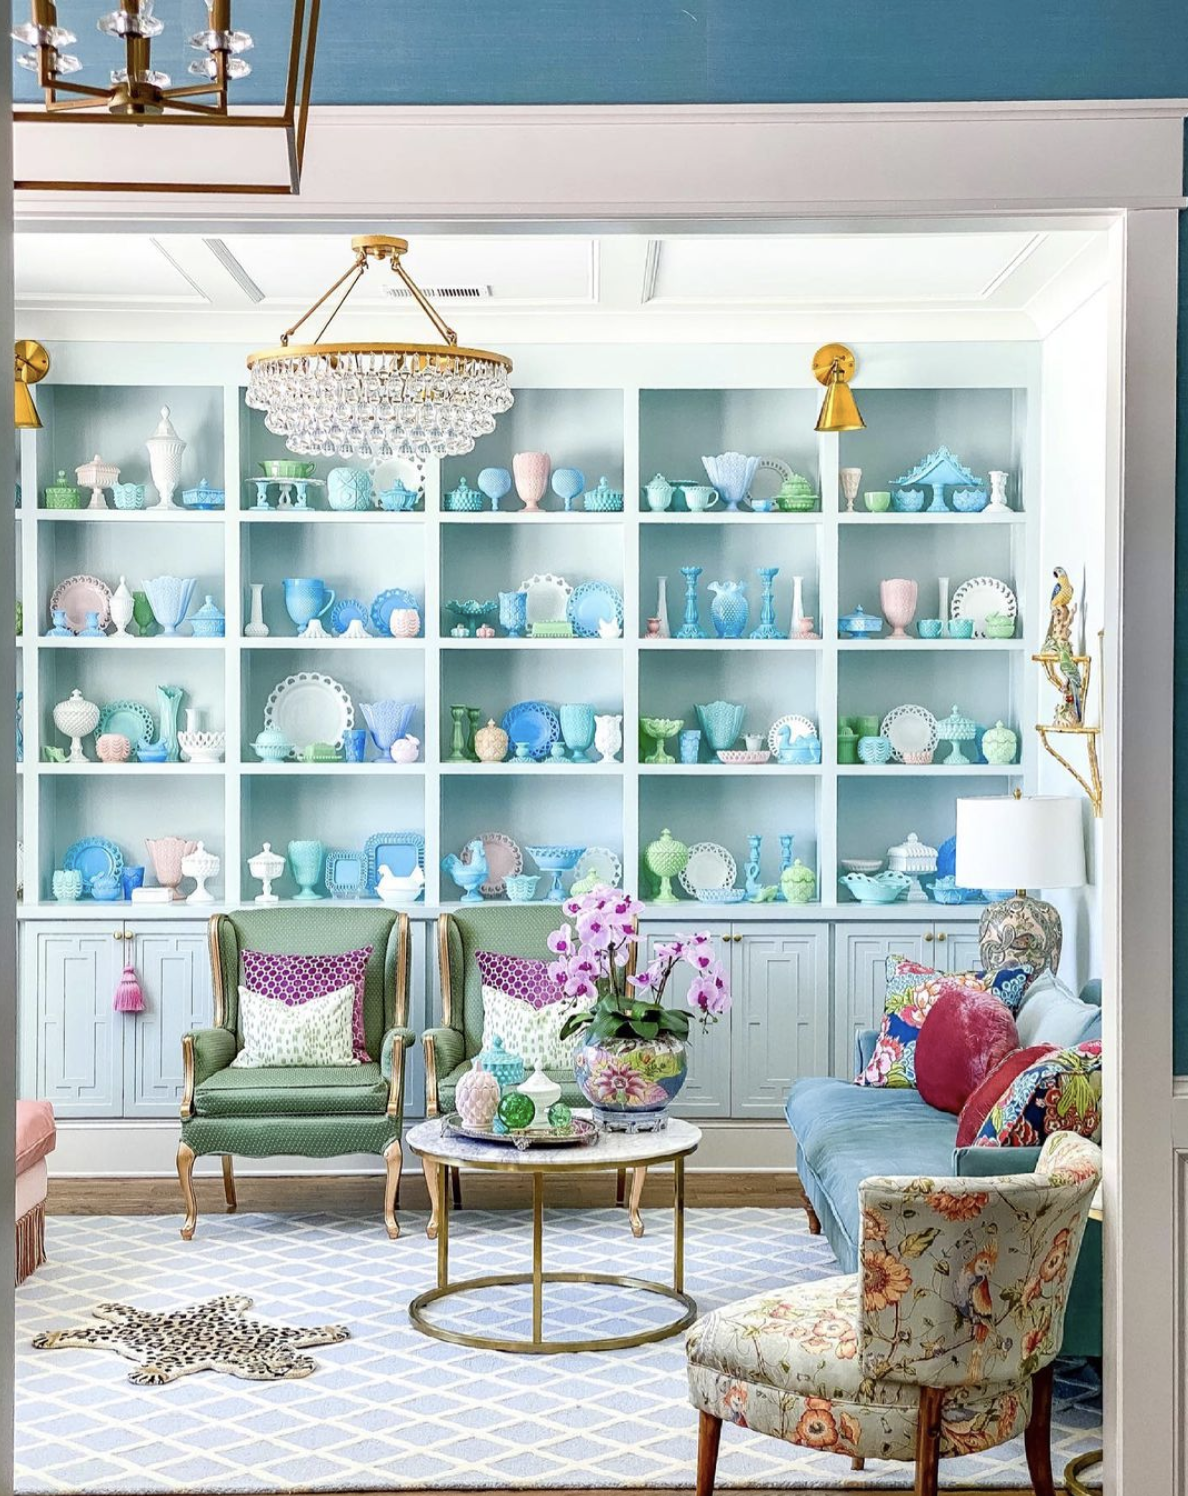 Eclectic Home Tour Lala Saks - love this Huge, colorful milk glass collection in blue, pink and white kellyelko.com